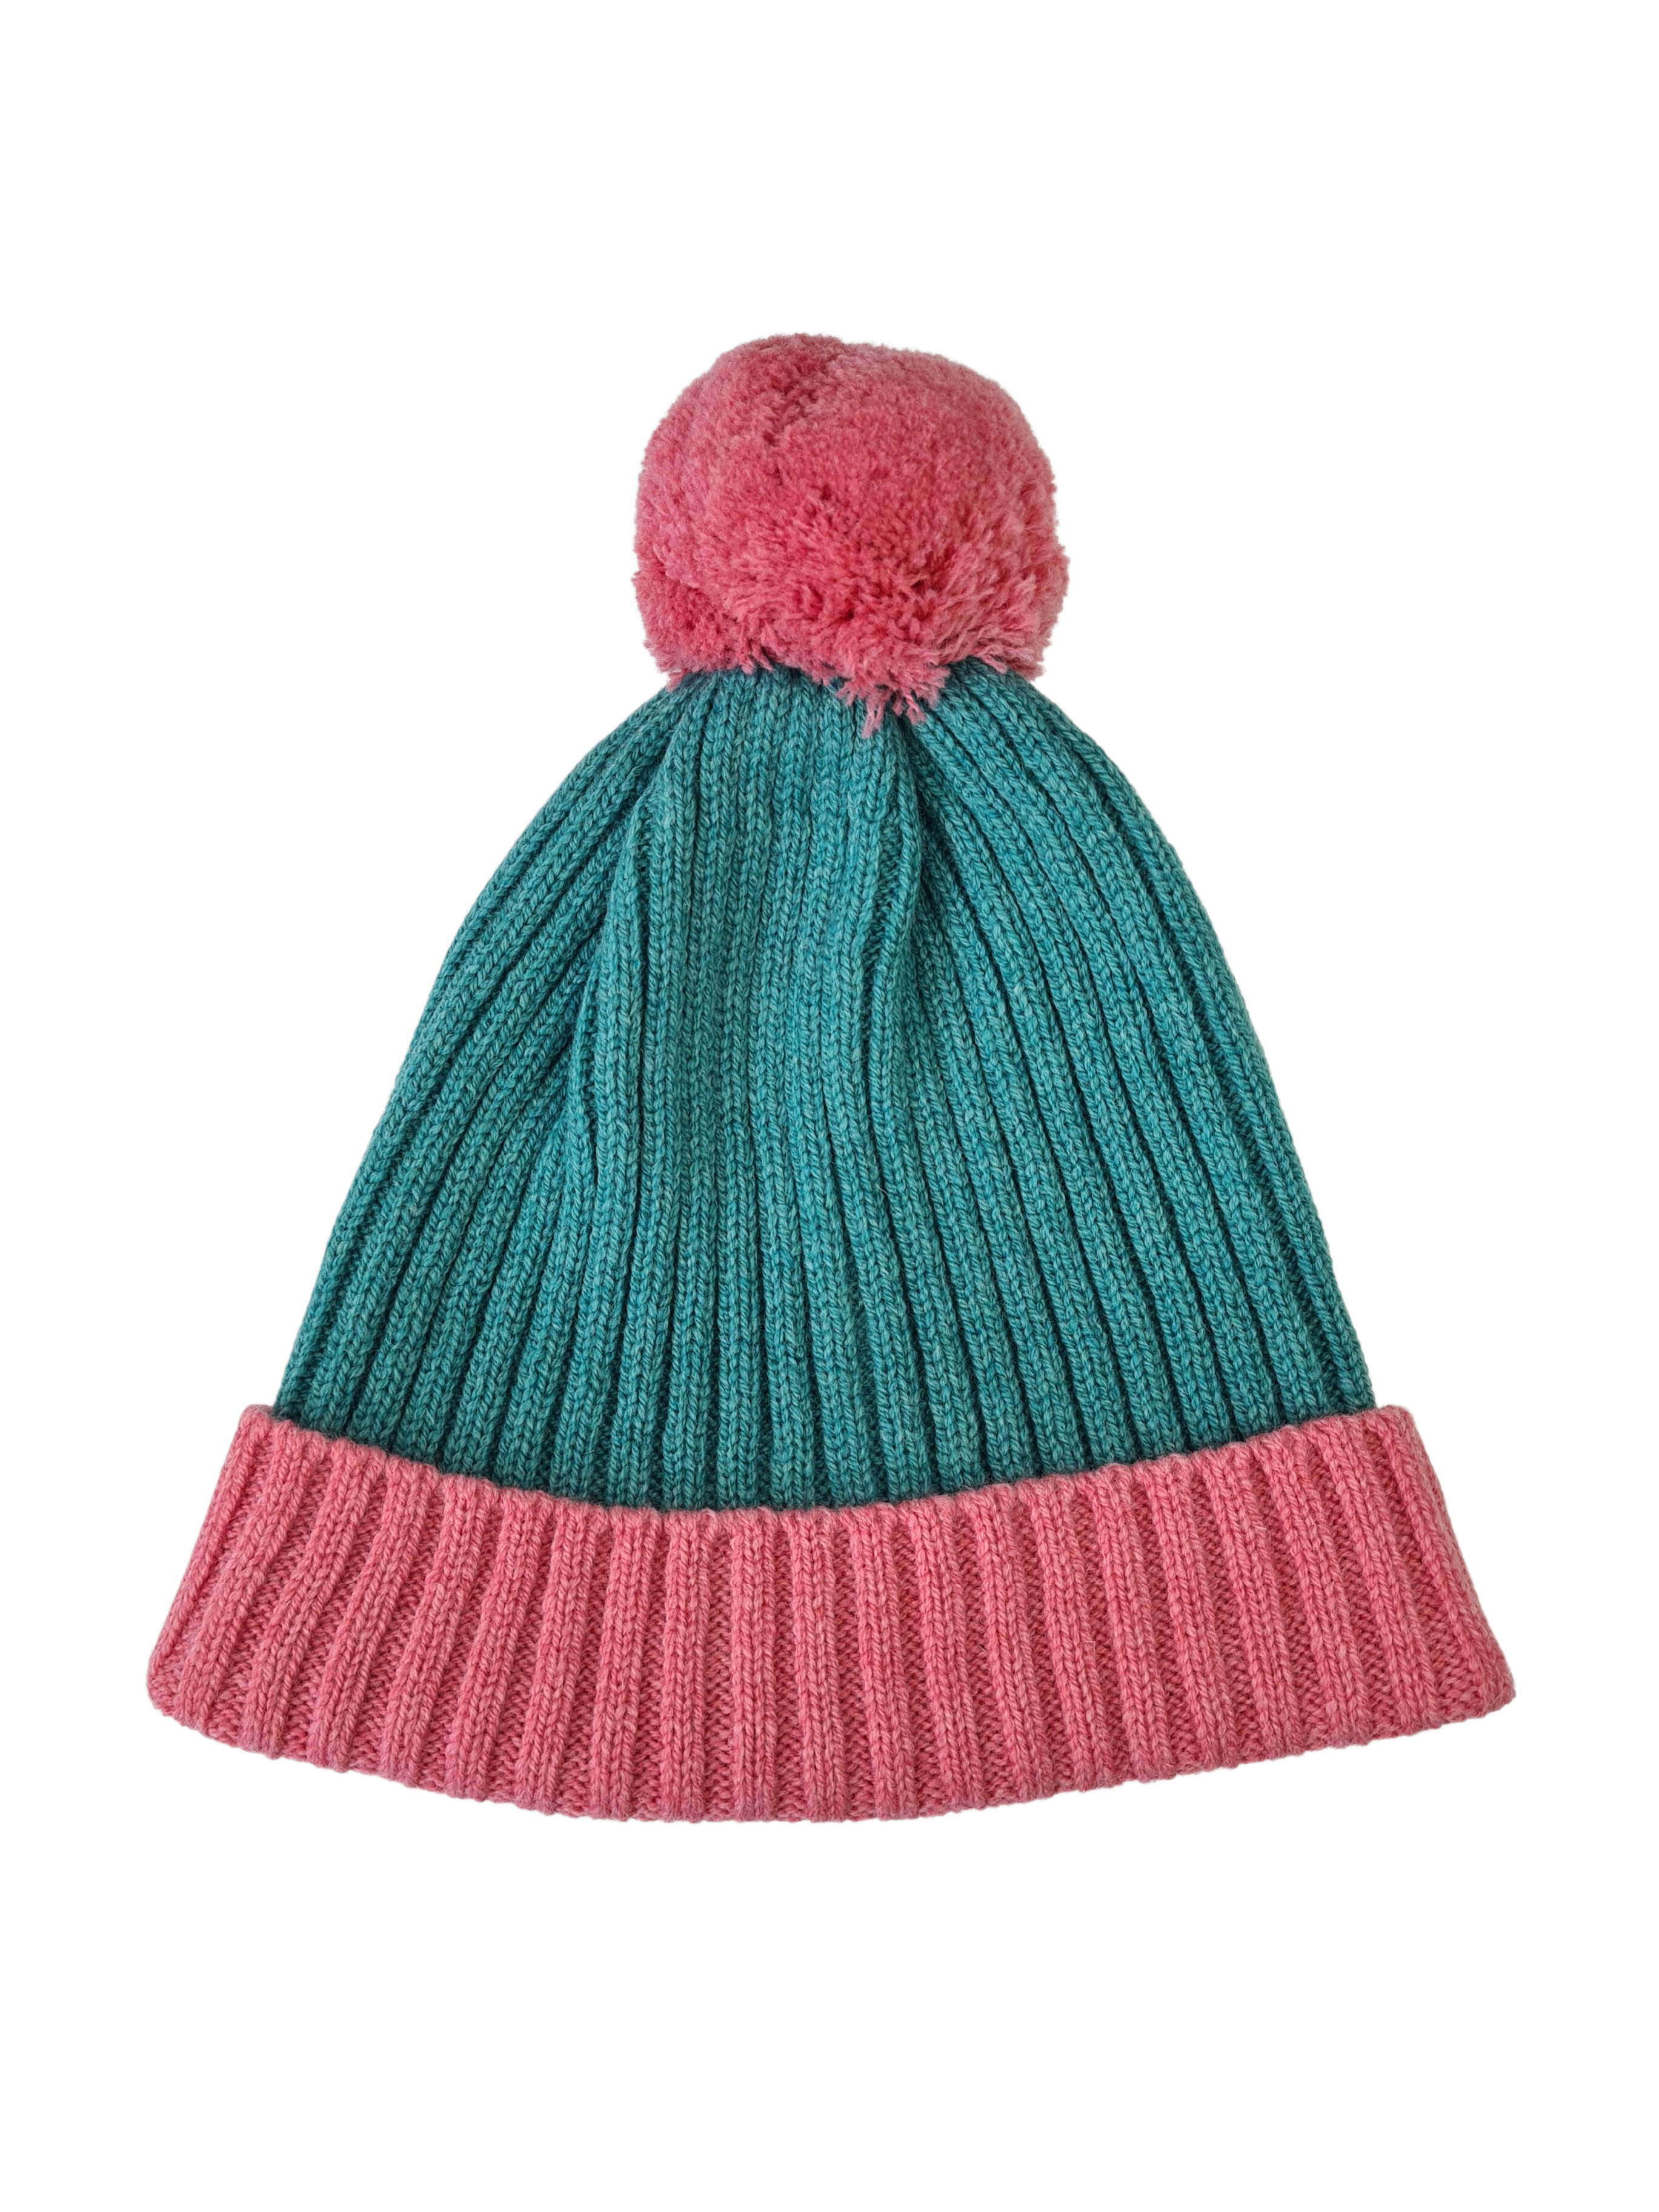 A pink and blue bobble hat. The bobble hat has a ribbed pattern and pink pom pom.